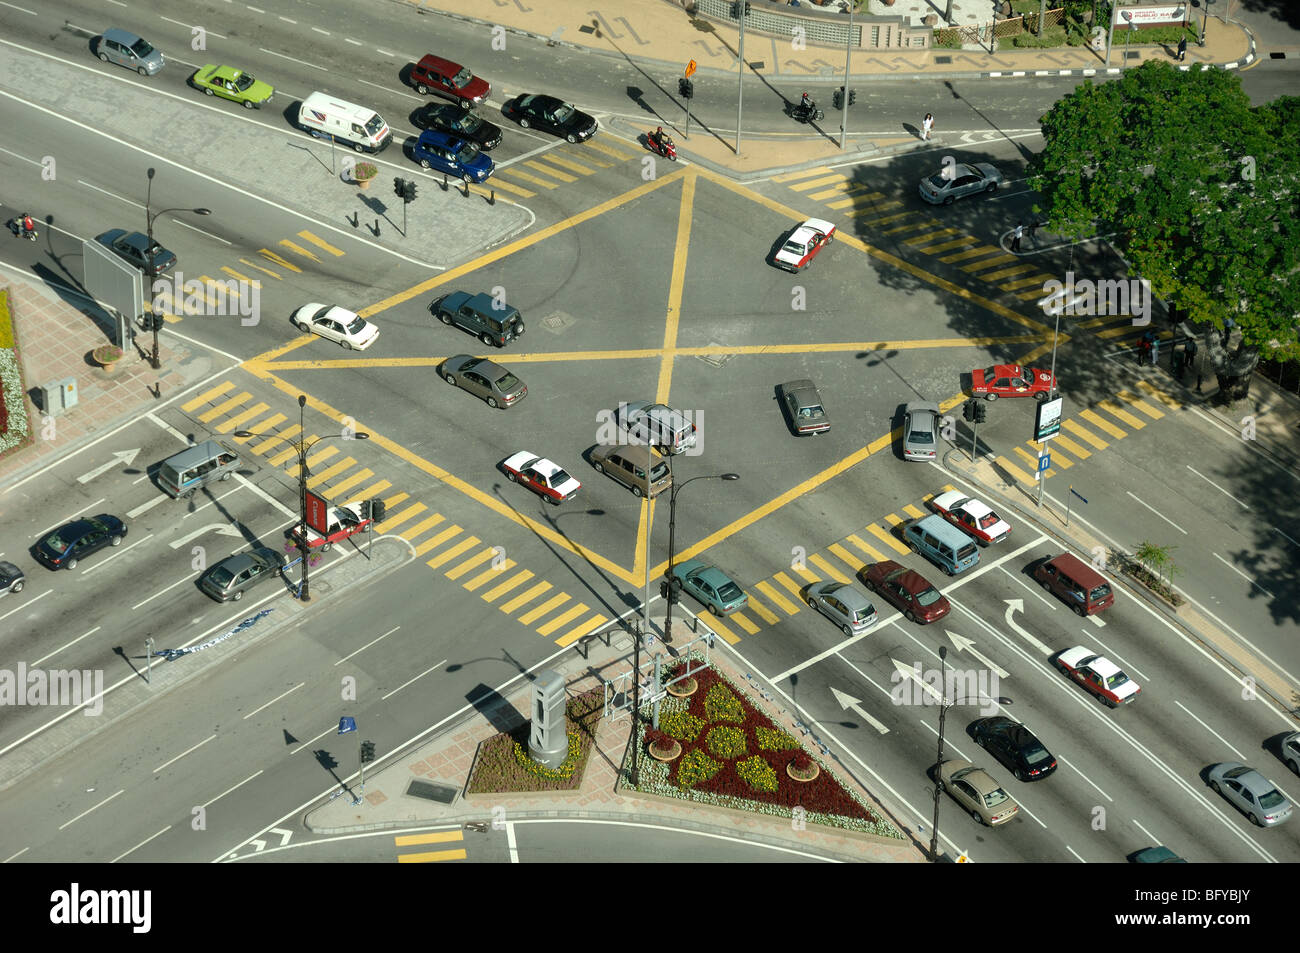 Aerial View of Road Junction, Crossroads or Traffic Intersection, KLCC or Kuala Lumpur City Centre, Kuala Lumpur, Malaysia Stock Photo